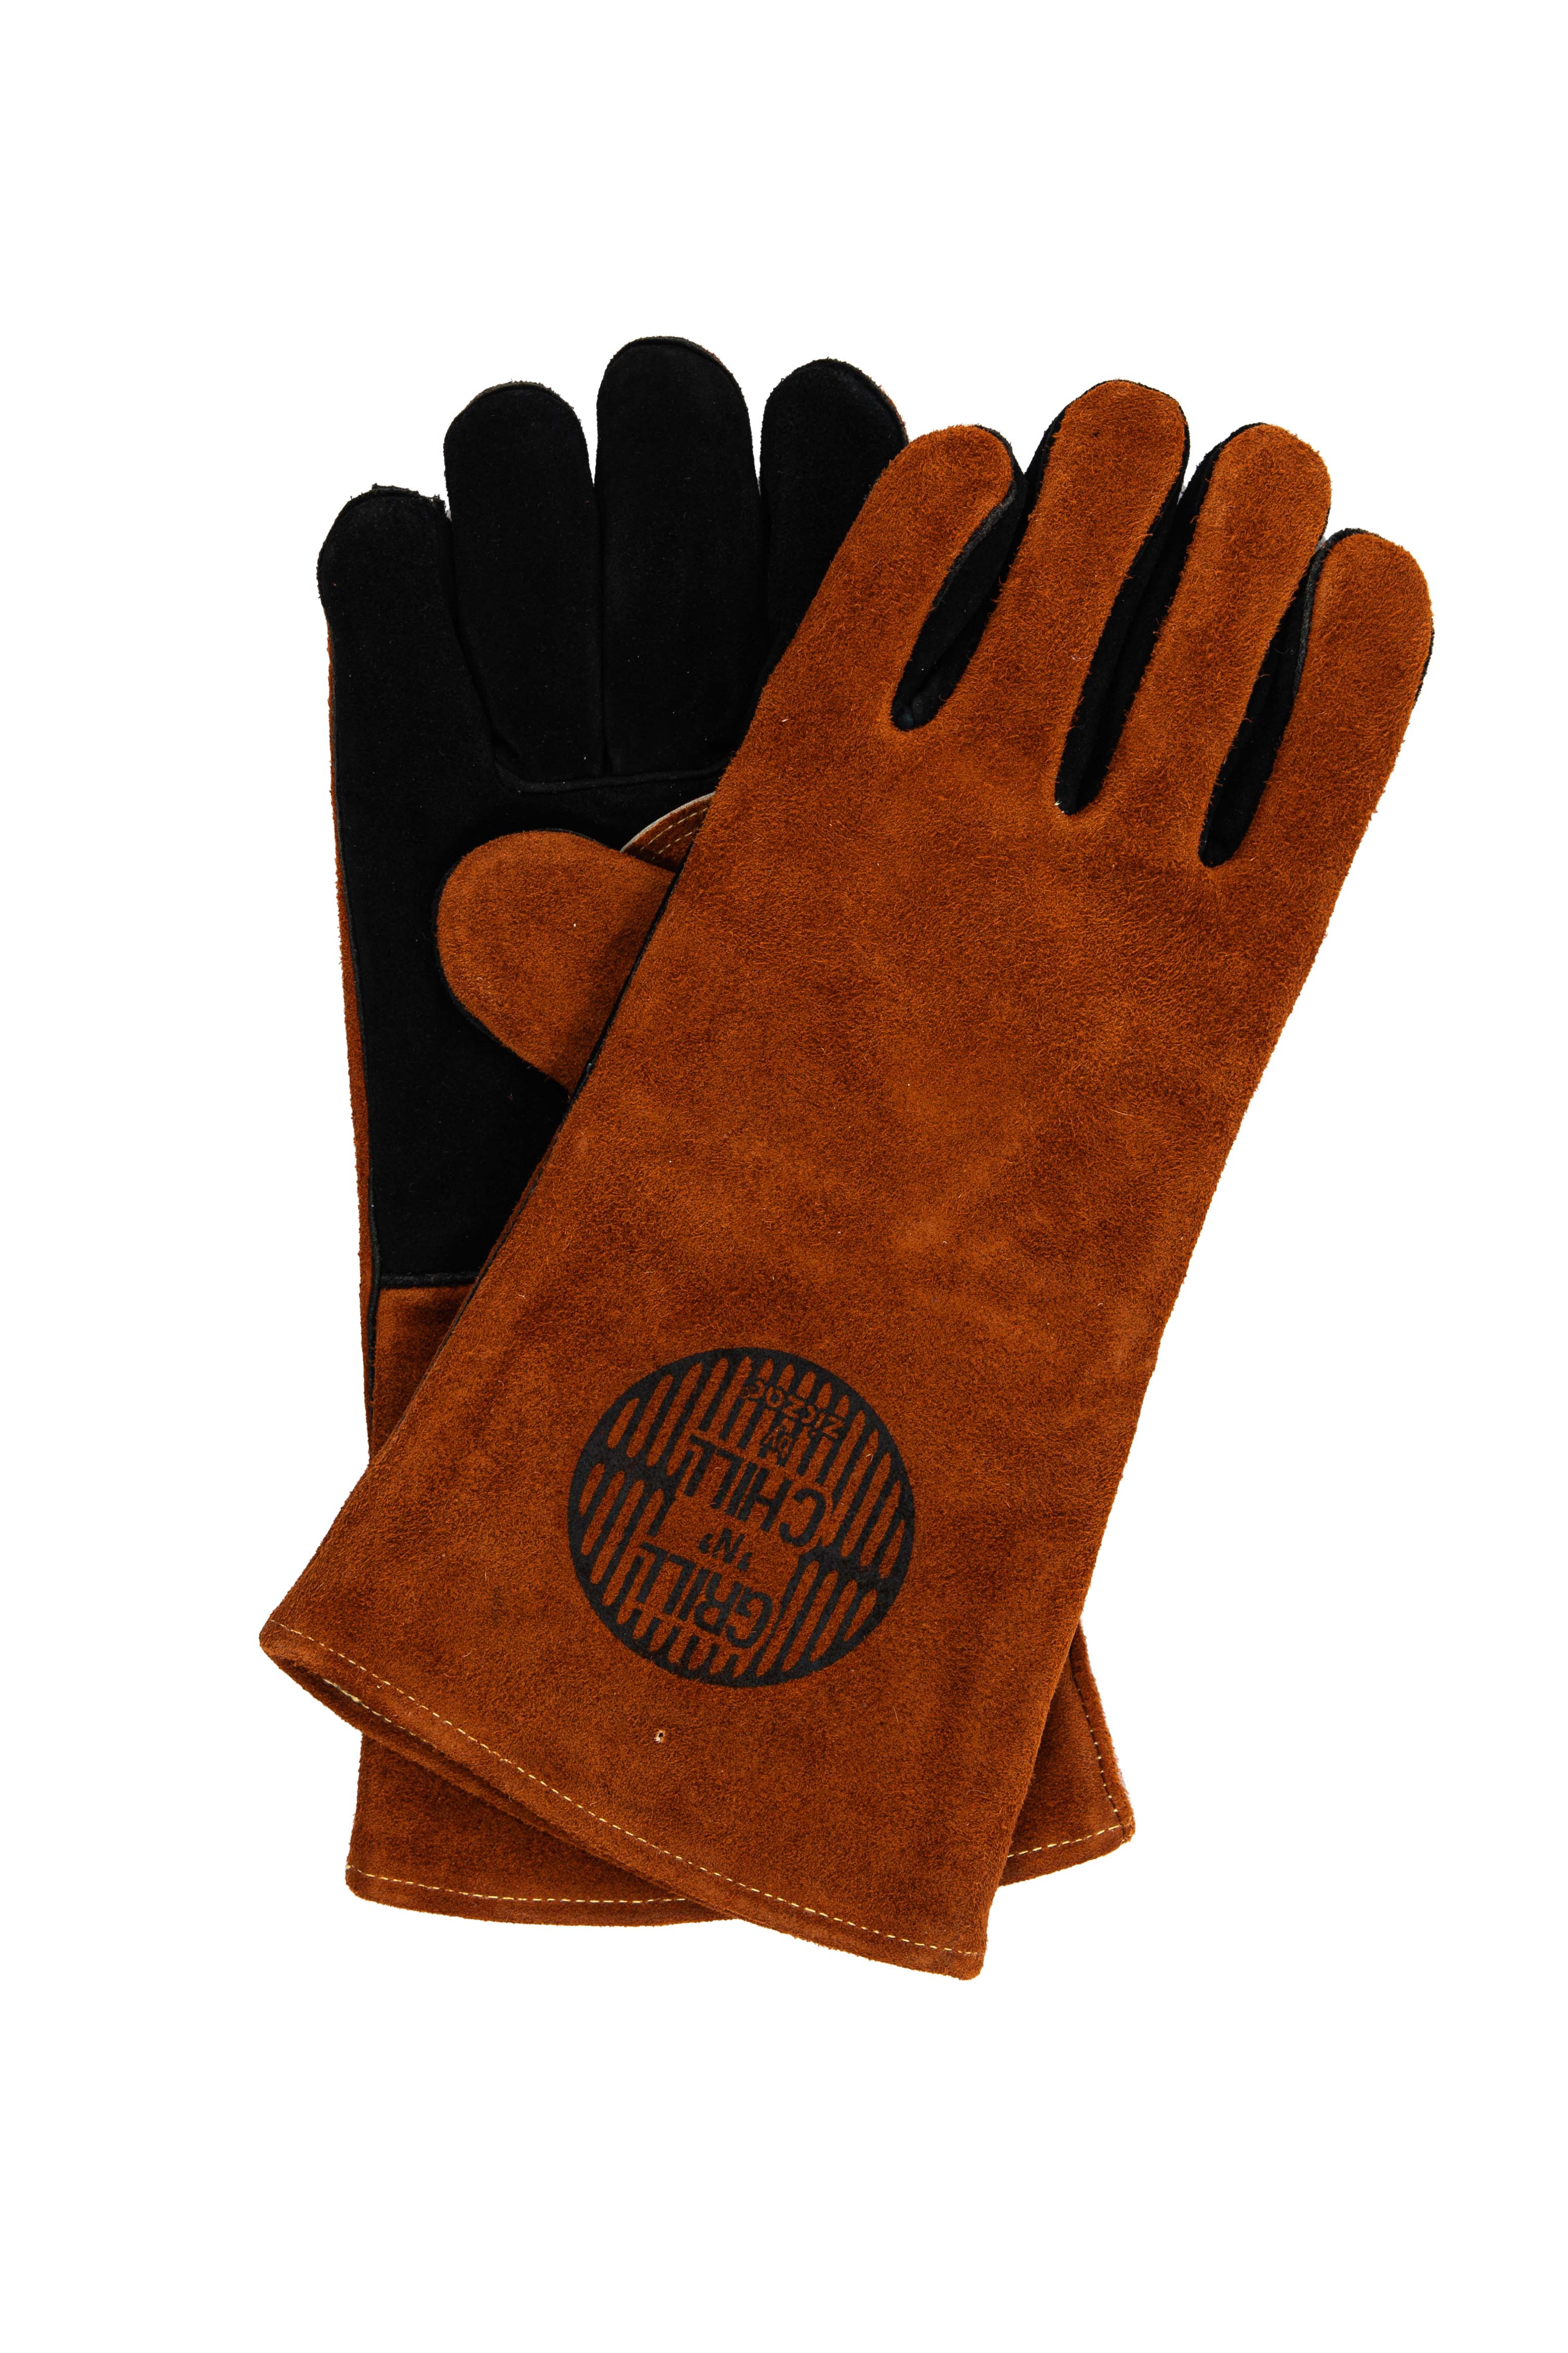 Set of 2 leather BBQ gloves - 36 x 19 cm - brown